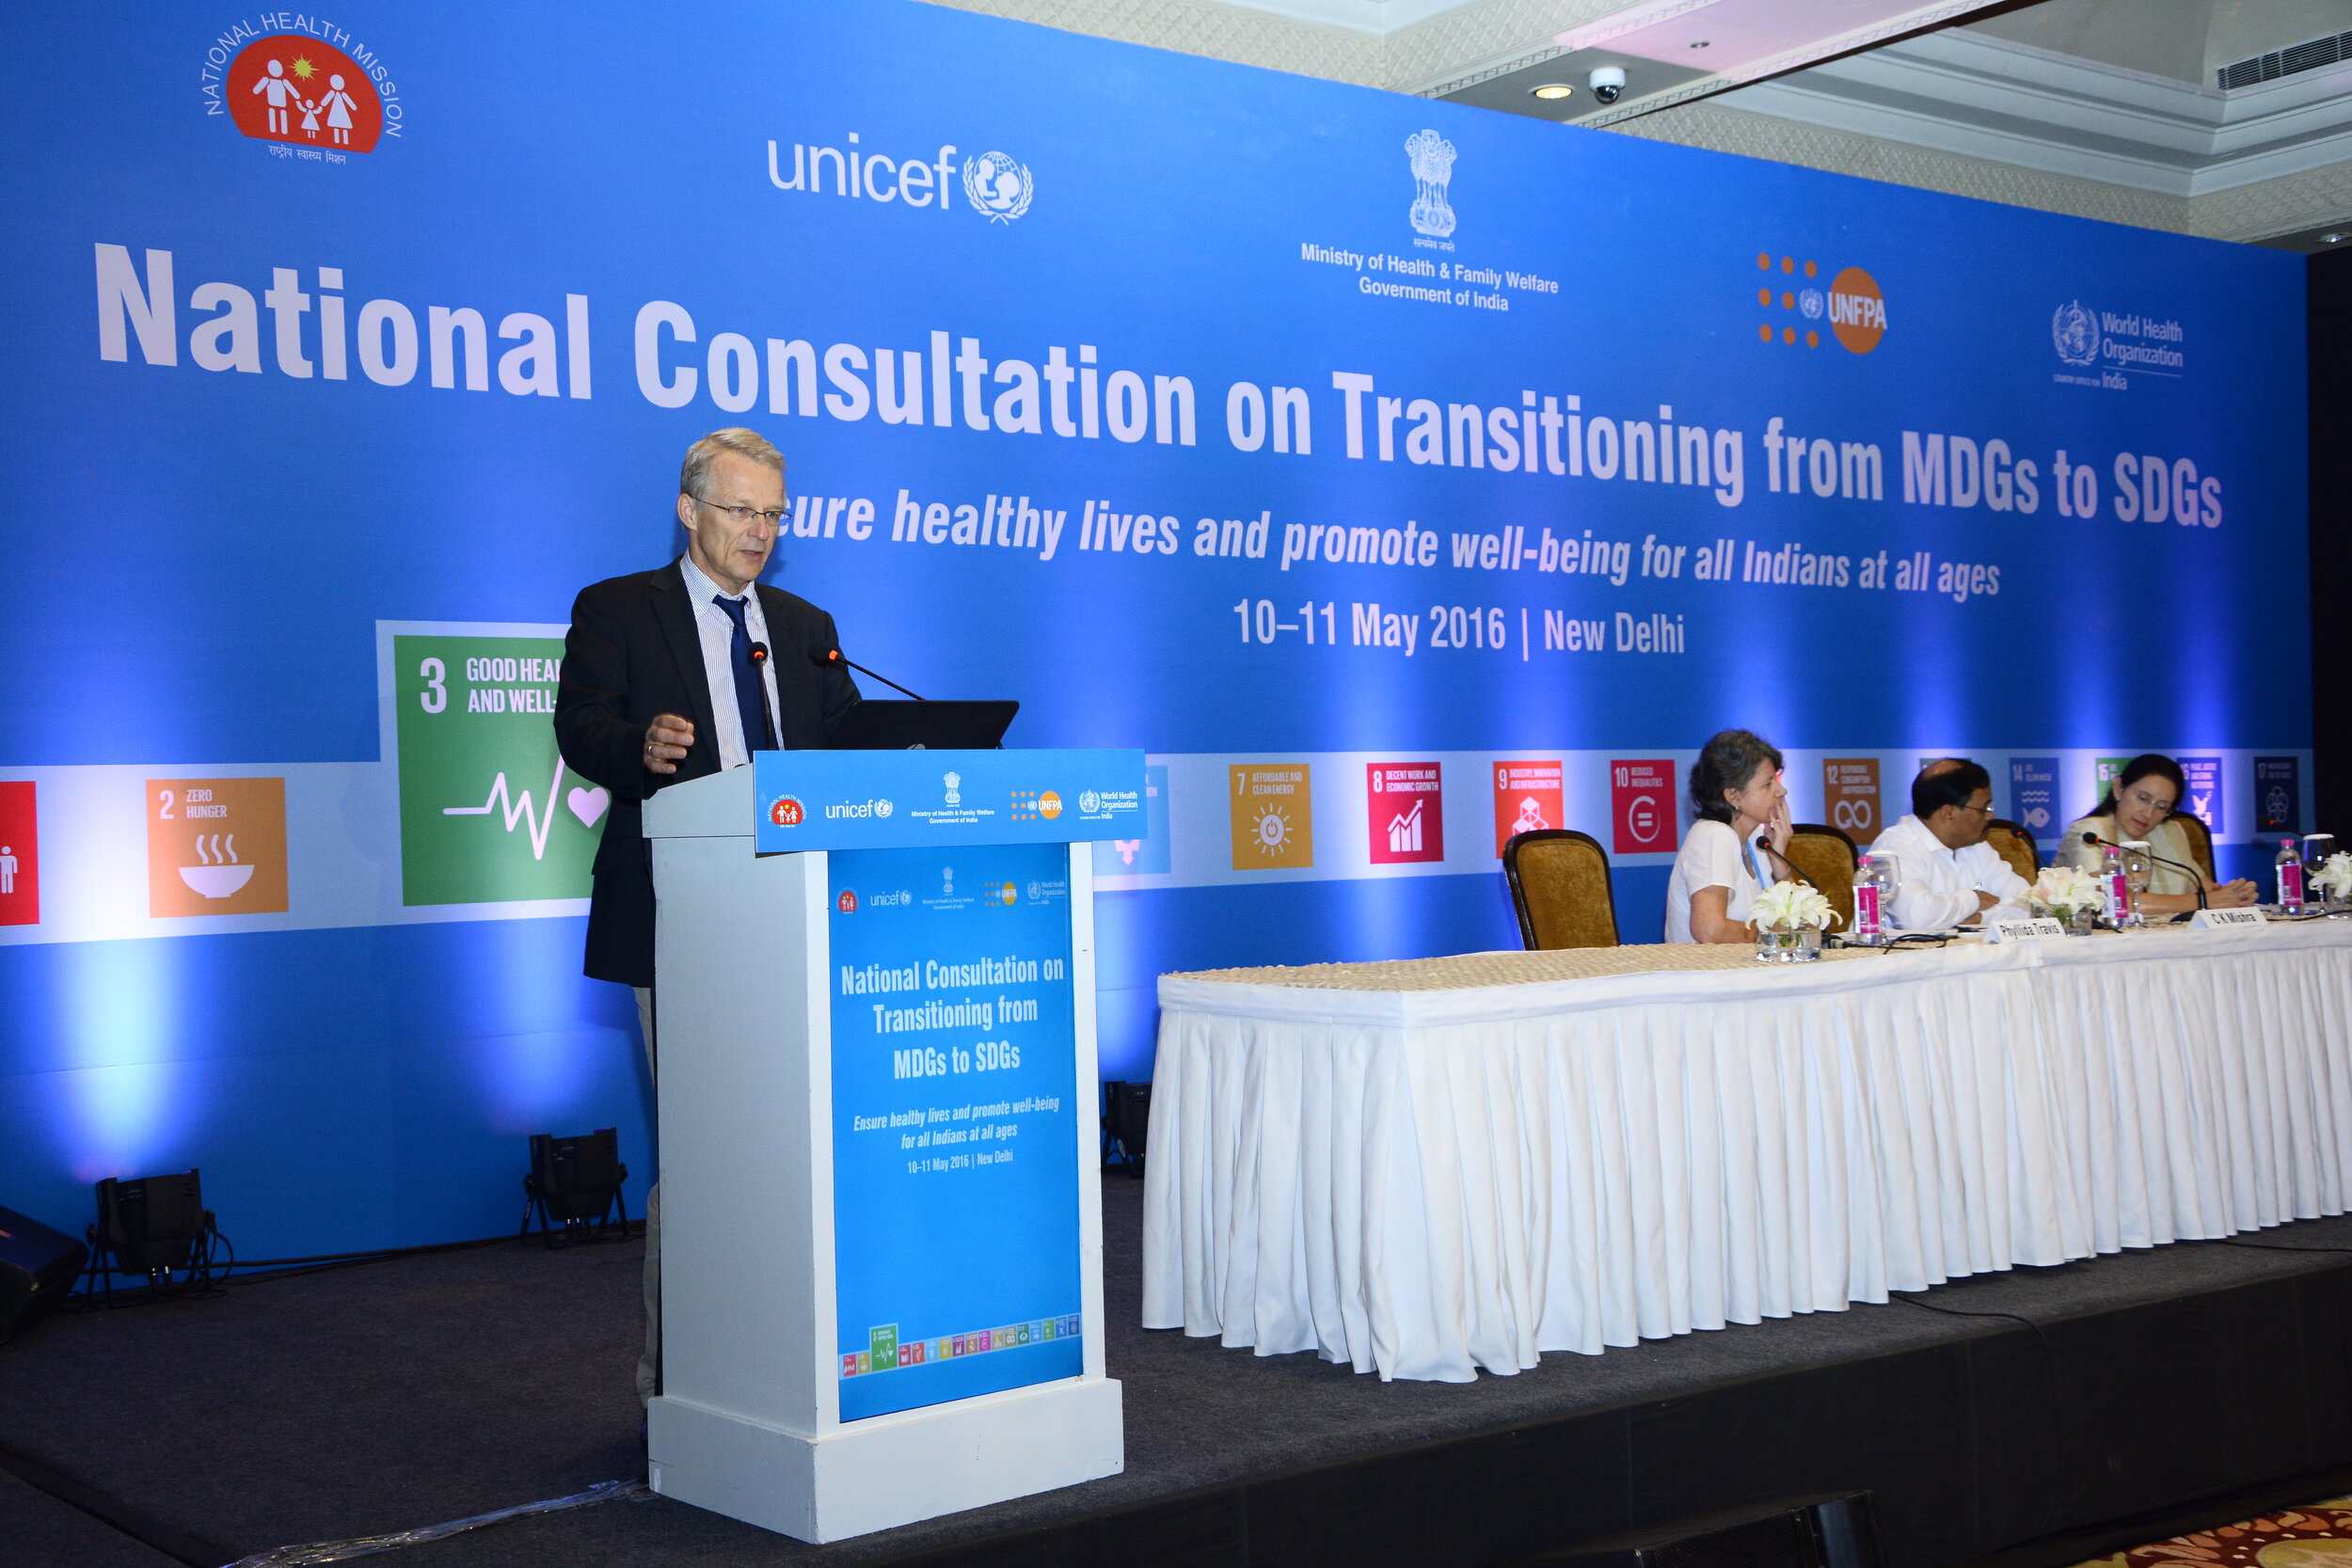 National Consultation on Transitioning from MDGs to SDGs - Conferences, Meetings &amp; Workshops